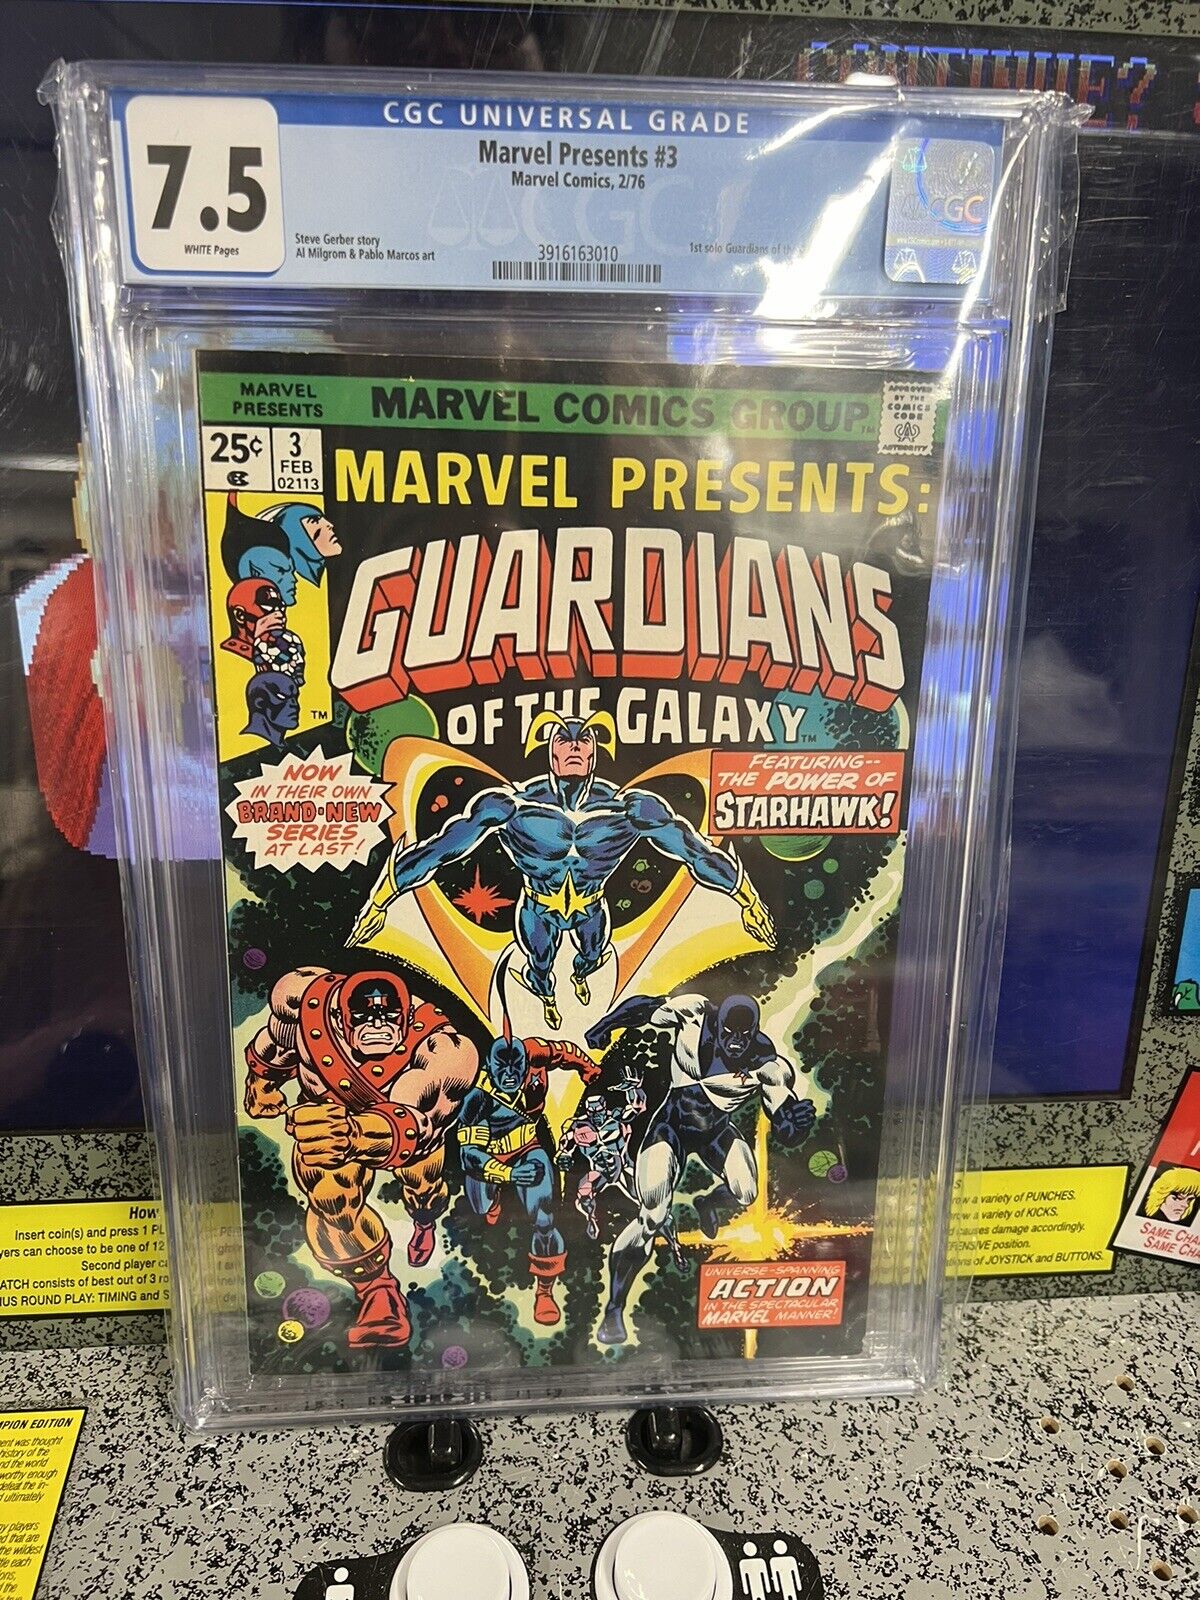 1976 Marvel Presents #3 1st Solo Guardians of the Galaxy Book Graded CGC 7.5